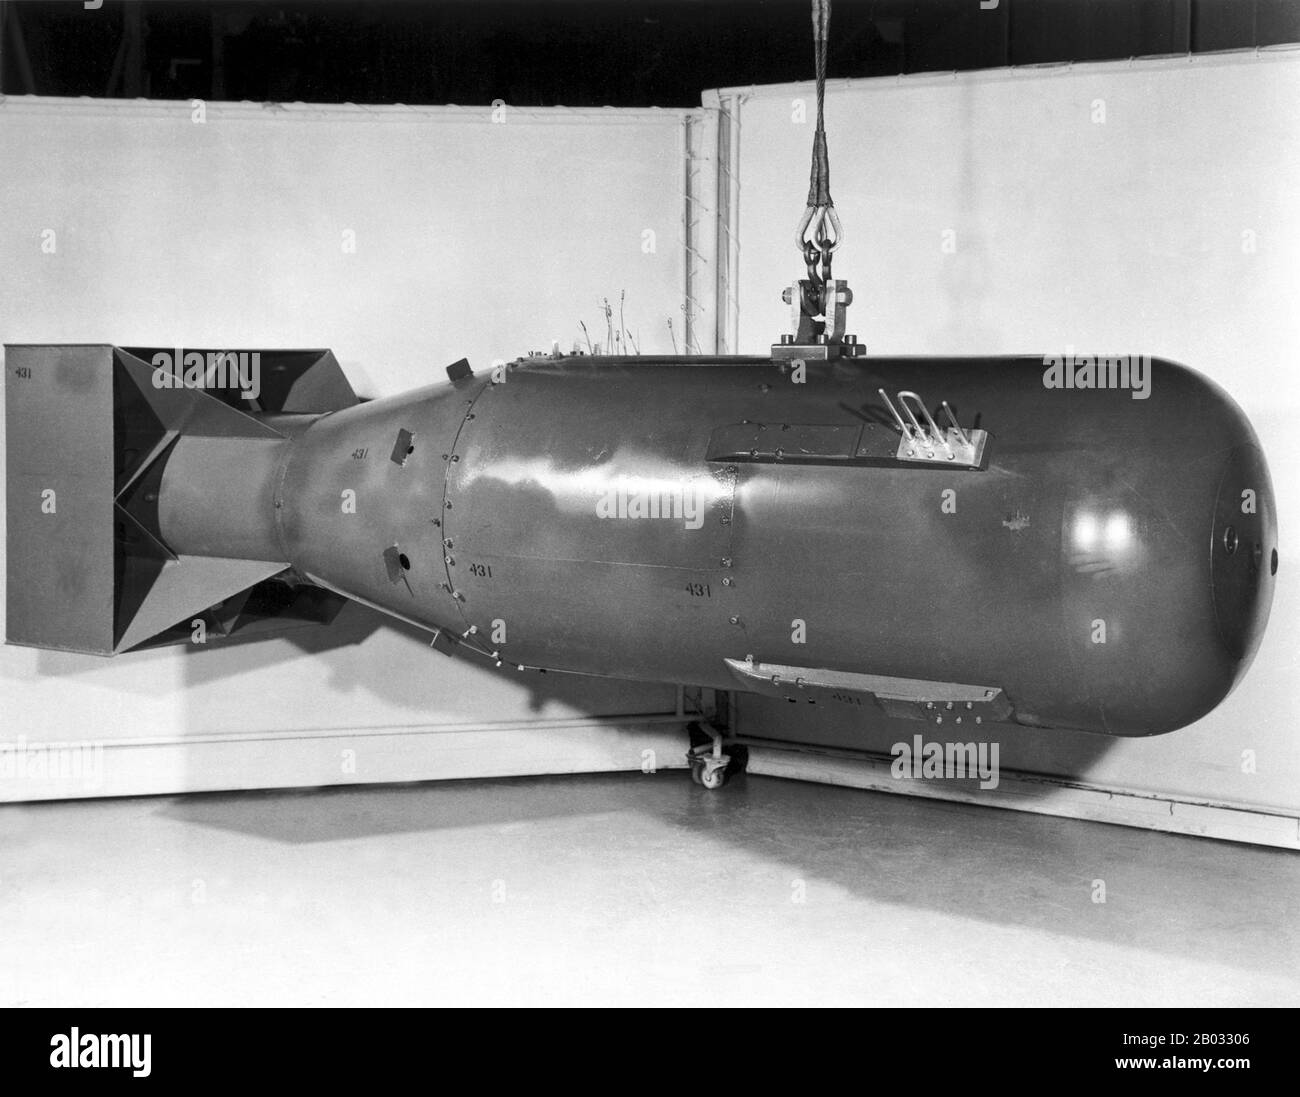 'Little Boy' was the codename for the atomic bomb dropped on the Japanese city of Hiroshima on 6 August 1945.  It was the first atomic bomb to be used in warfare. The Hiroshima bombing was the second artificial nuclear explosion in history, after the Trinity test, and the first uranium-based detonation. It exploded with an energy of approximately 15 kilotons of TNT. The bomb caused significant destruction to the city of Hiroshima. Stock Photo